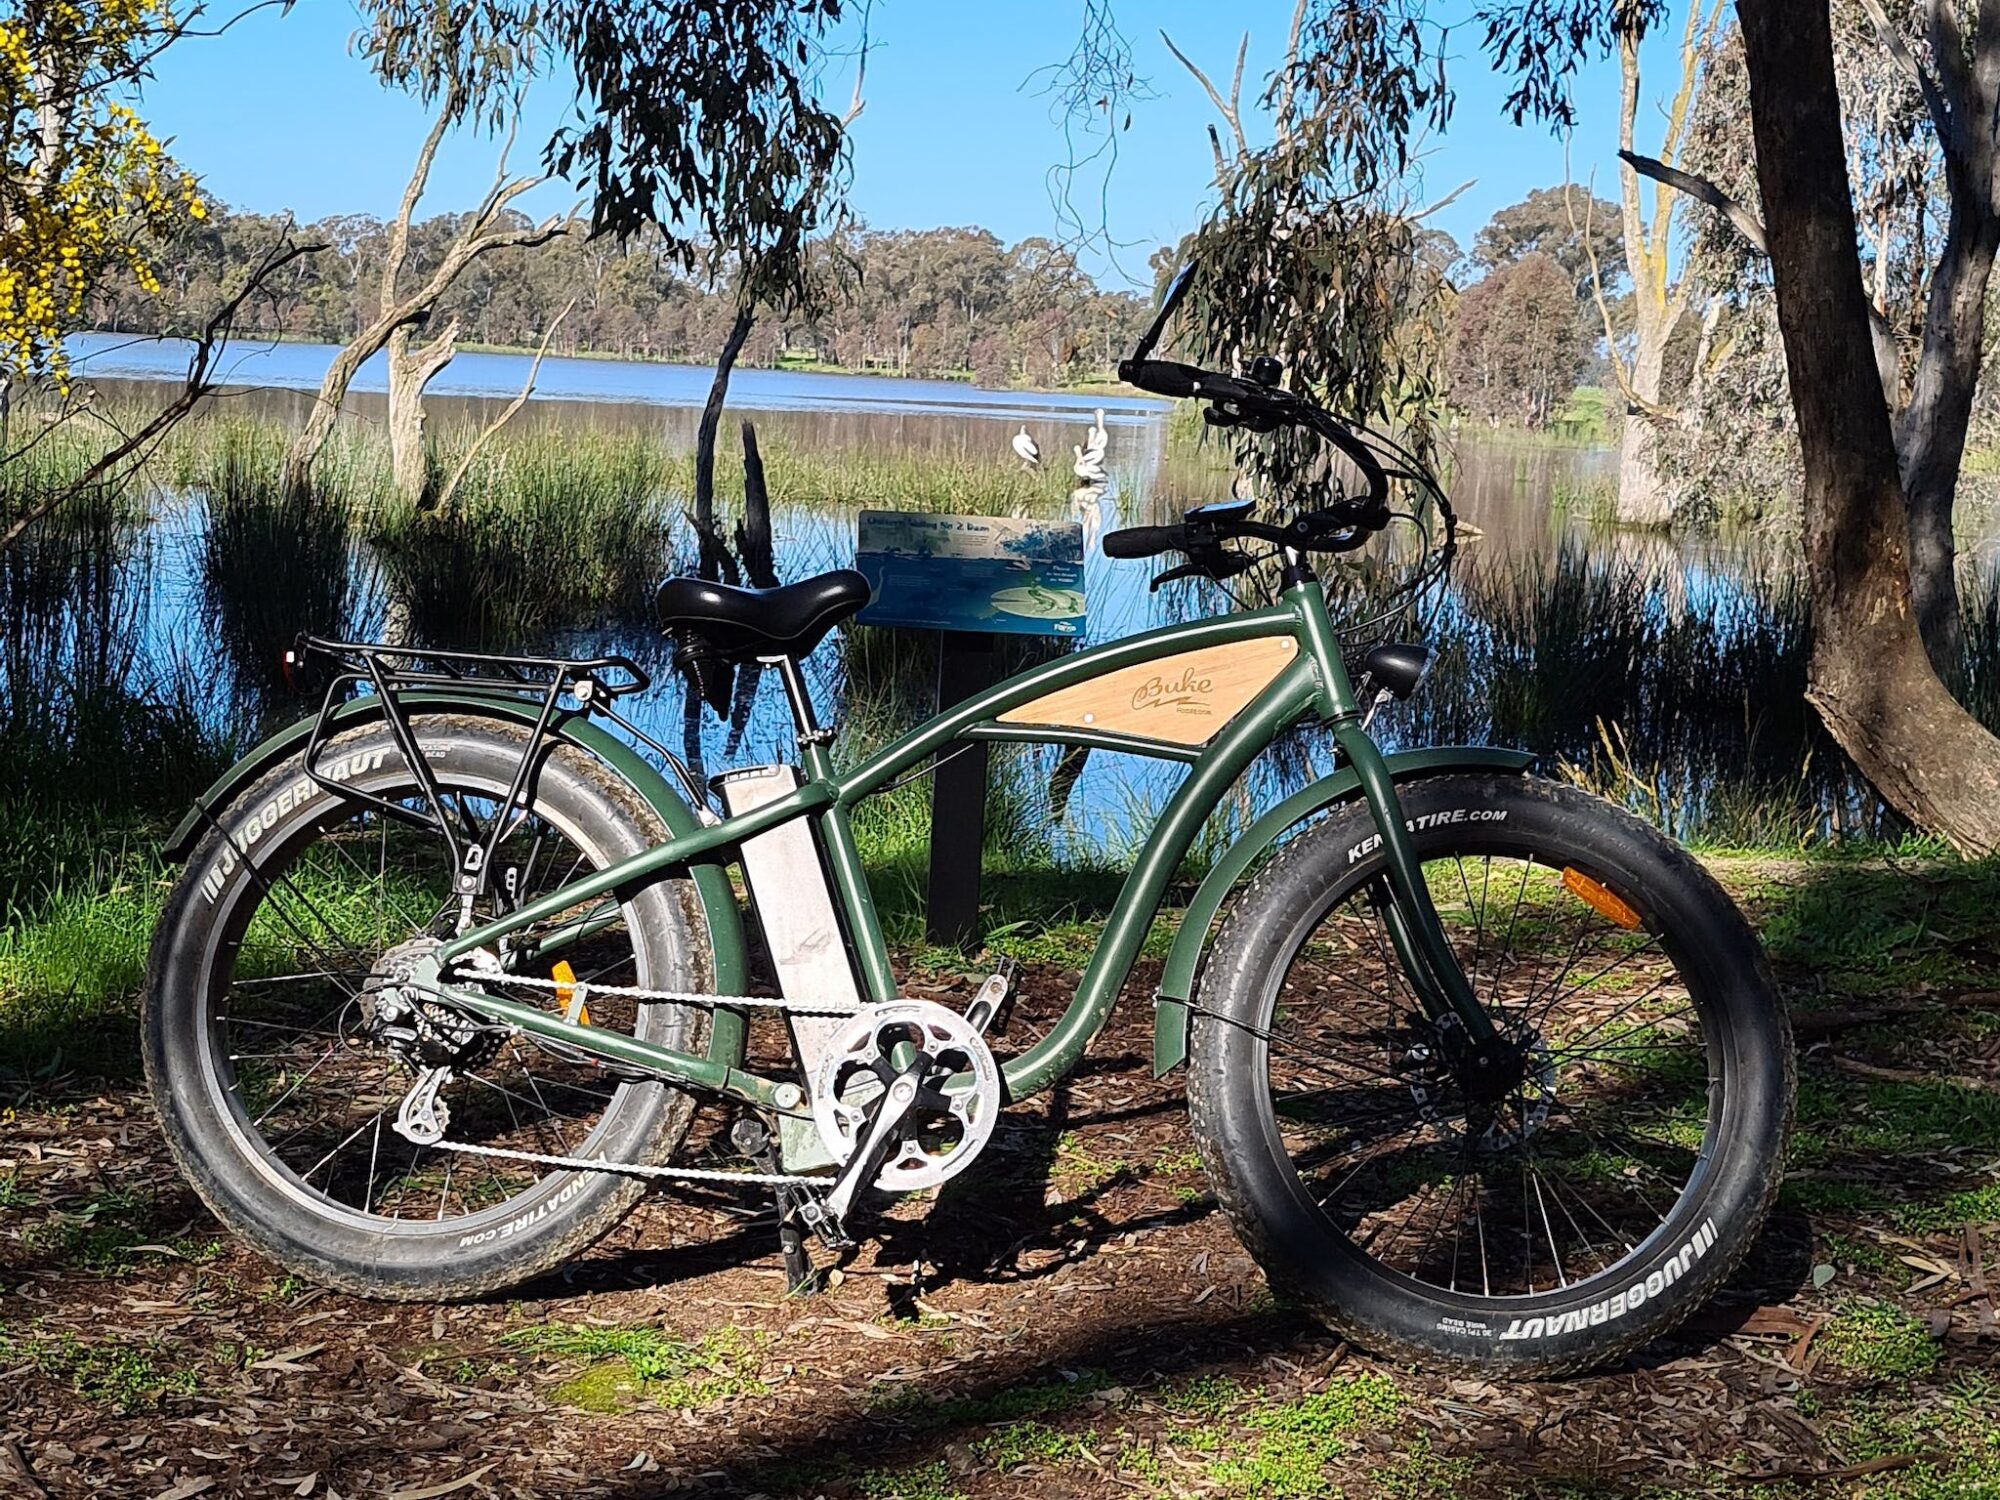 Explore the region on these bikes, riding to the Murray River